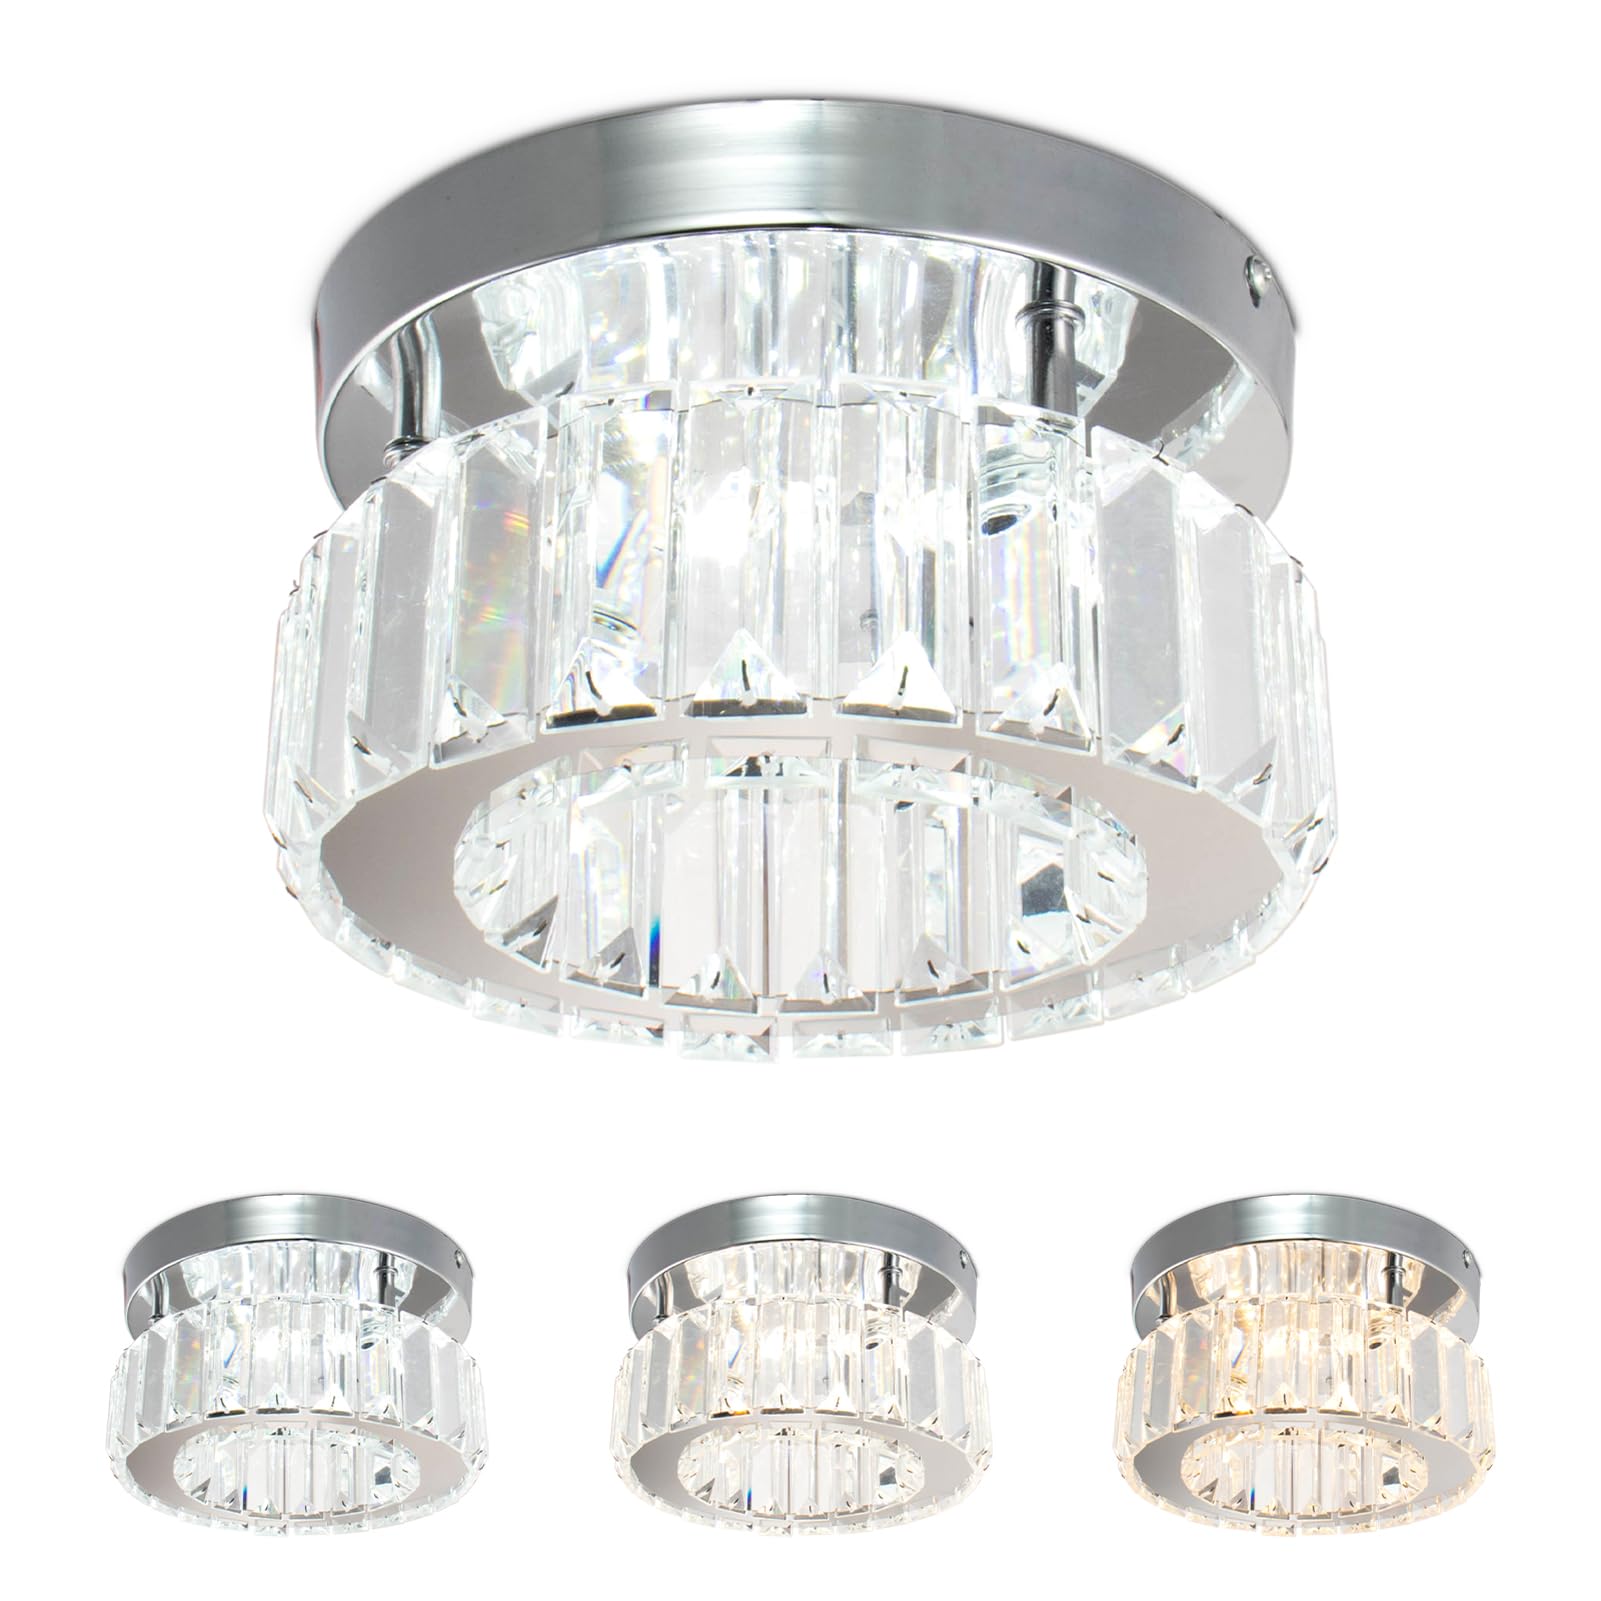 Modern Crystal Chandeliers Ceiling, Round Small Chandeliers 2700K/4500K/6500K Multicolor Semi Flush Mount Ceiling Light for Living Room Dining Room Hallway Foyer Living Room Small Room